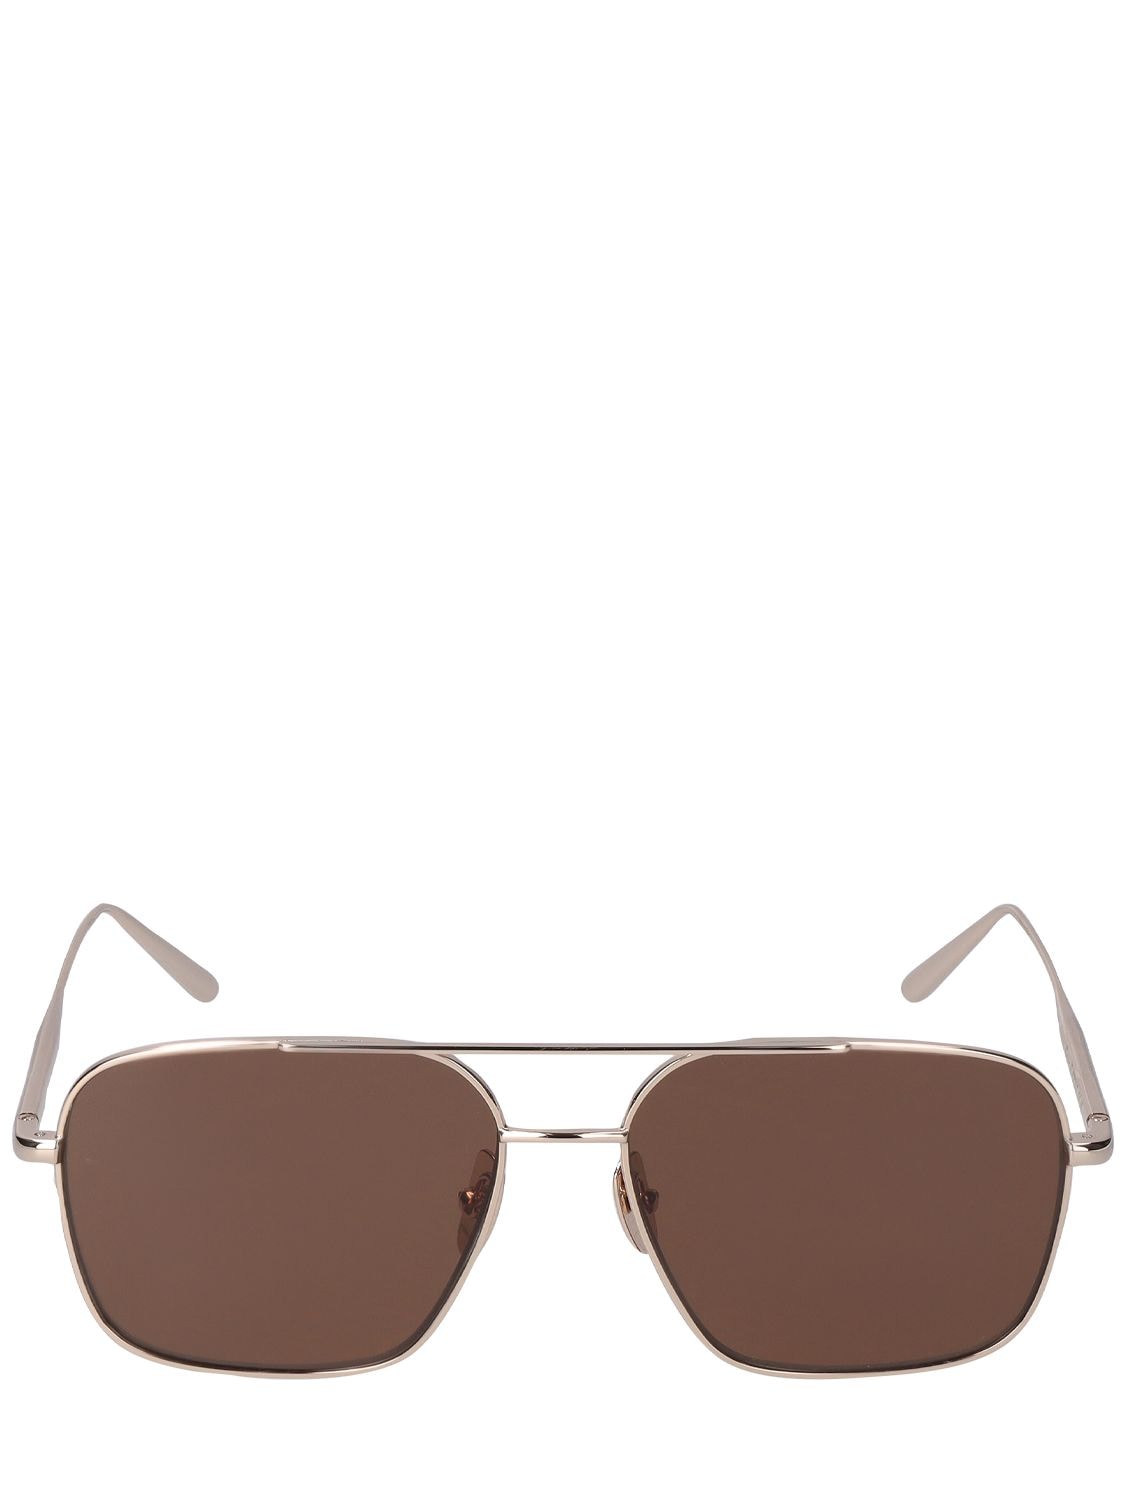 Chimi Aviator Brown Stainless Steel Sunglasses In Gold,brown